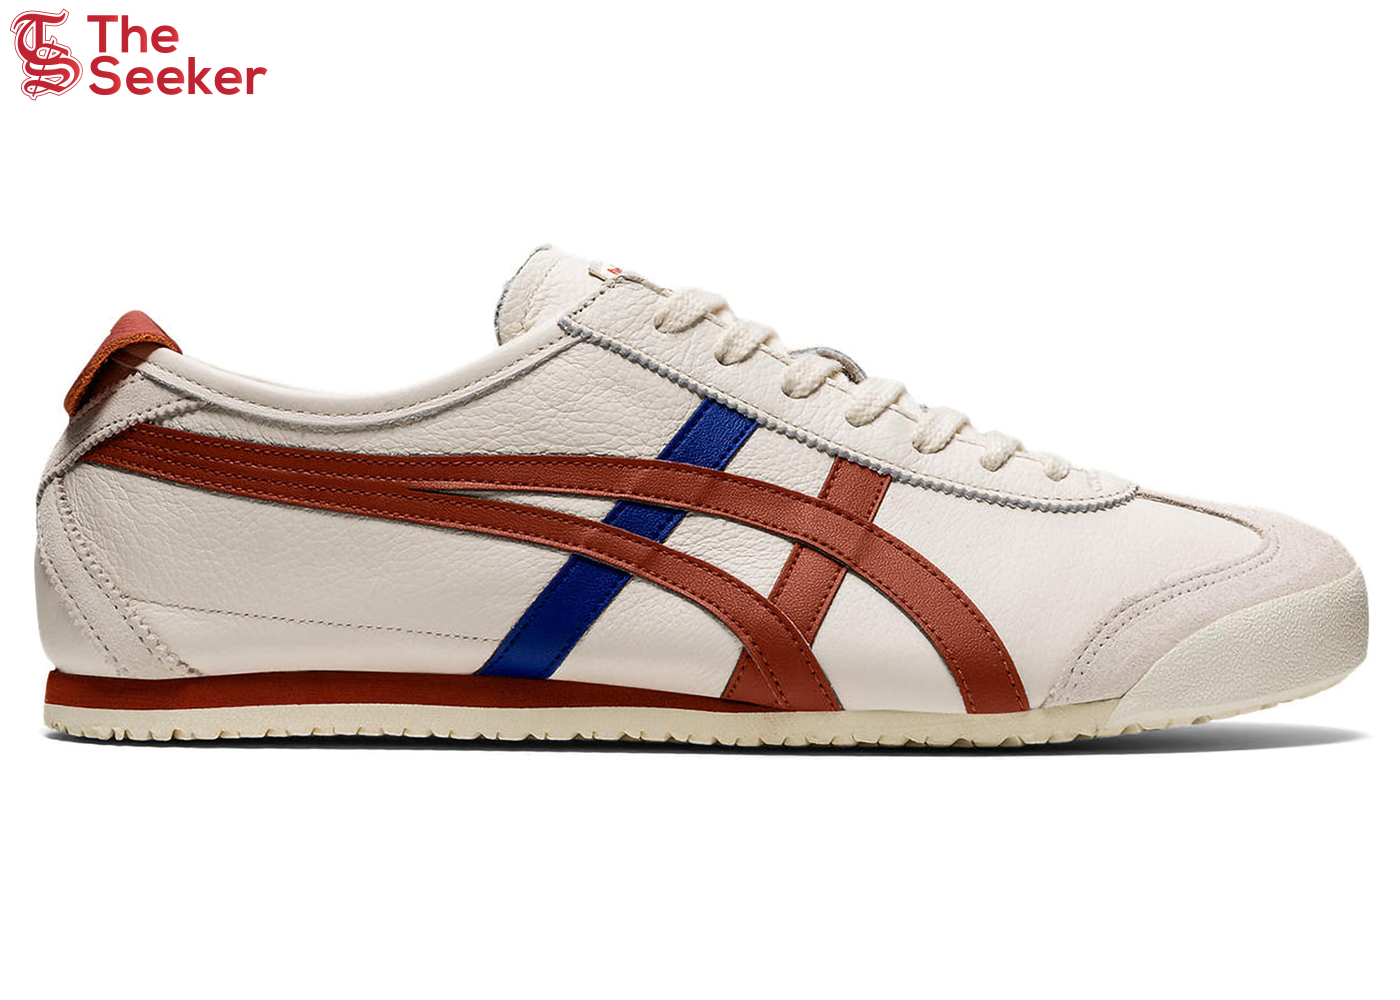 Onitsuka Tiger Mexico 66 Birch Rust Red Blue